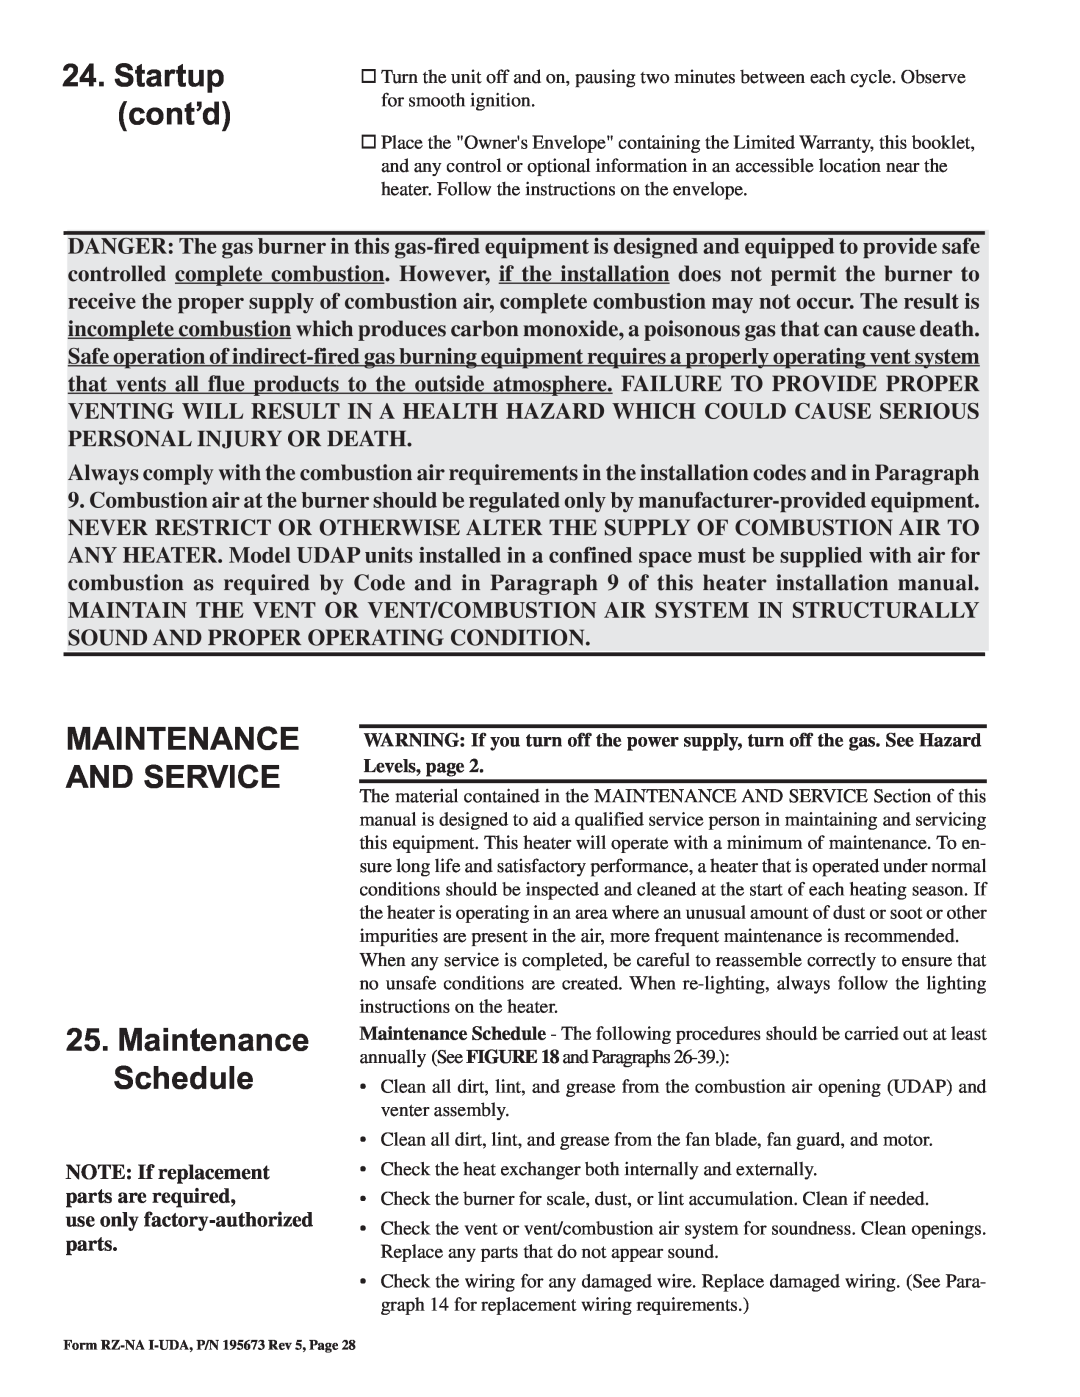 Thomas & Betts UDAS Startup cont’d, MAINTENANCE AND SERVICE 25.Maintenance Schedule, use only factory-authorizedparts 